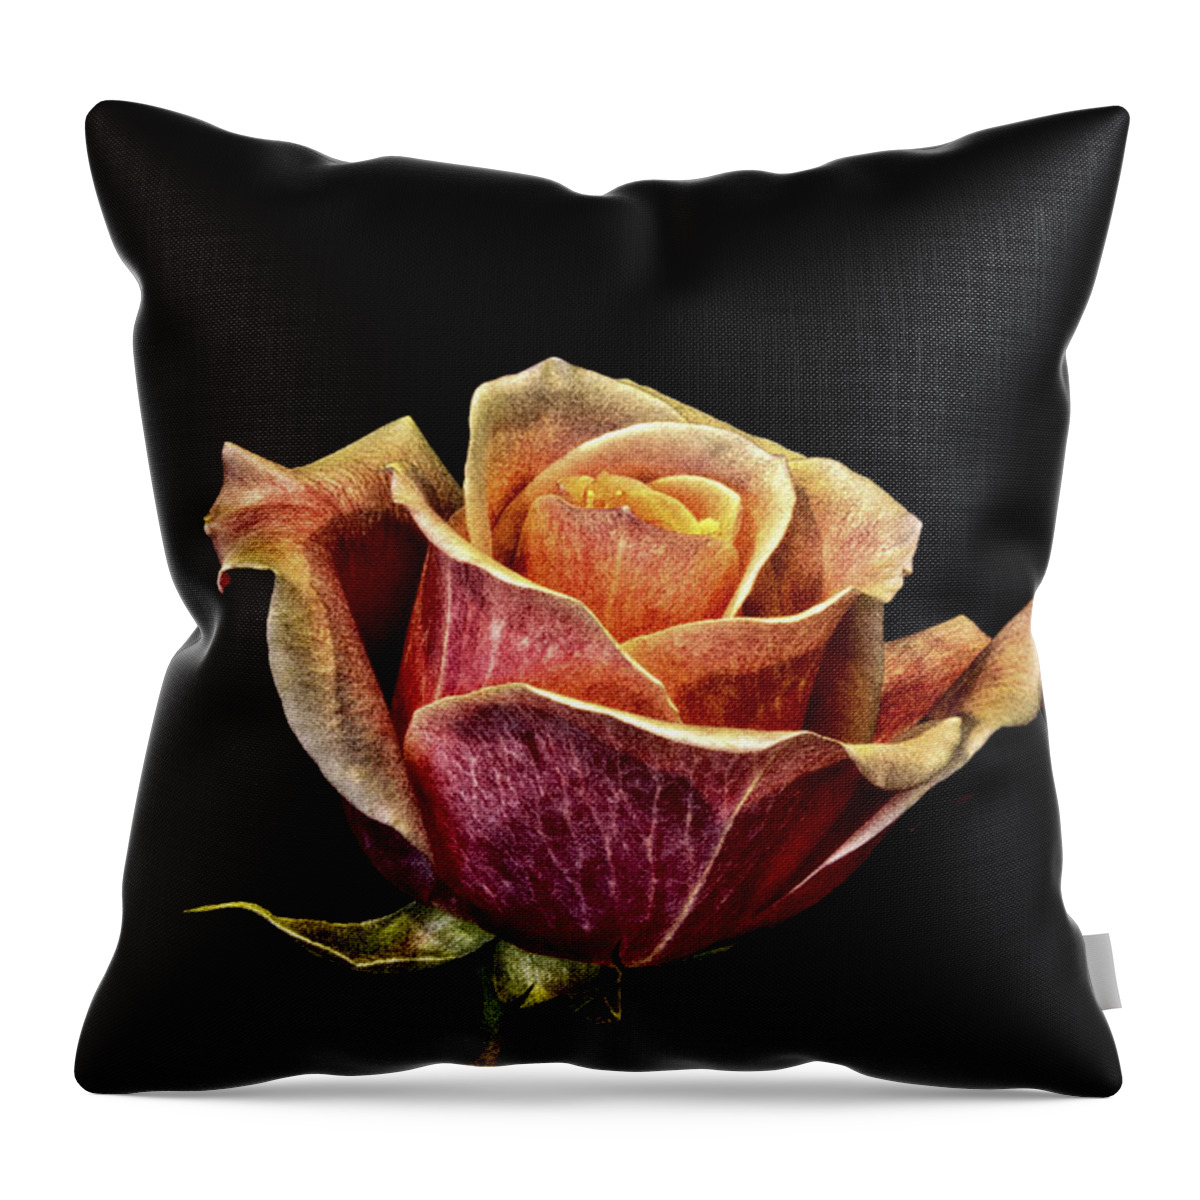 Vintage Rose Throw Pillow featuring the photograph Vintage Rose by Mitch Shindelbower